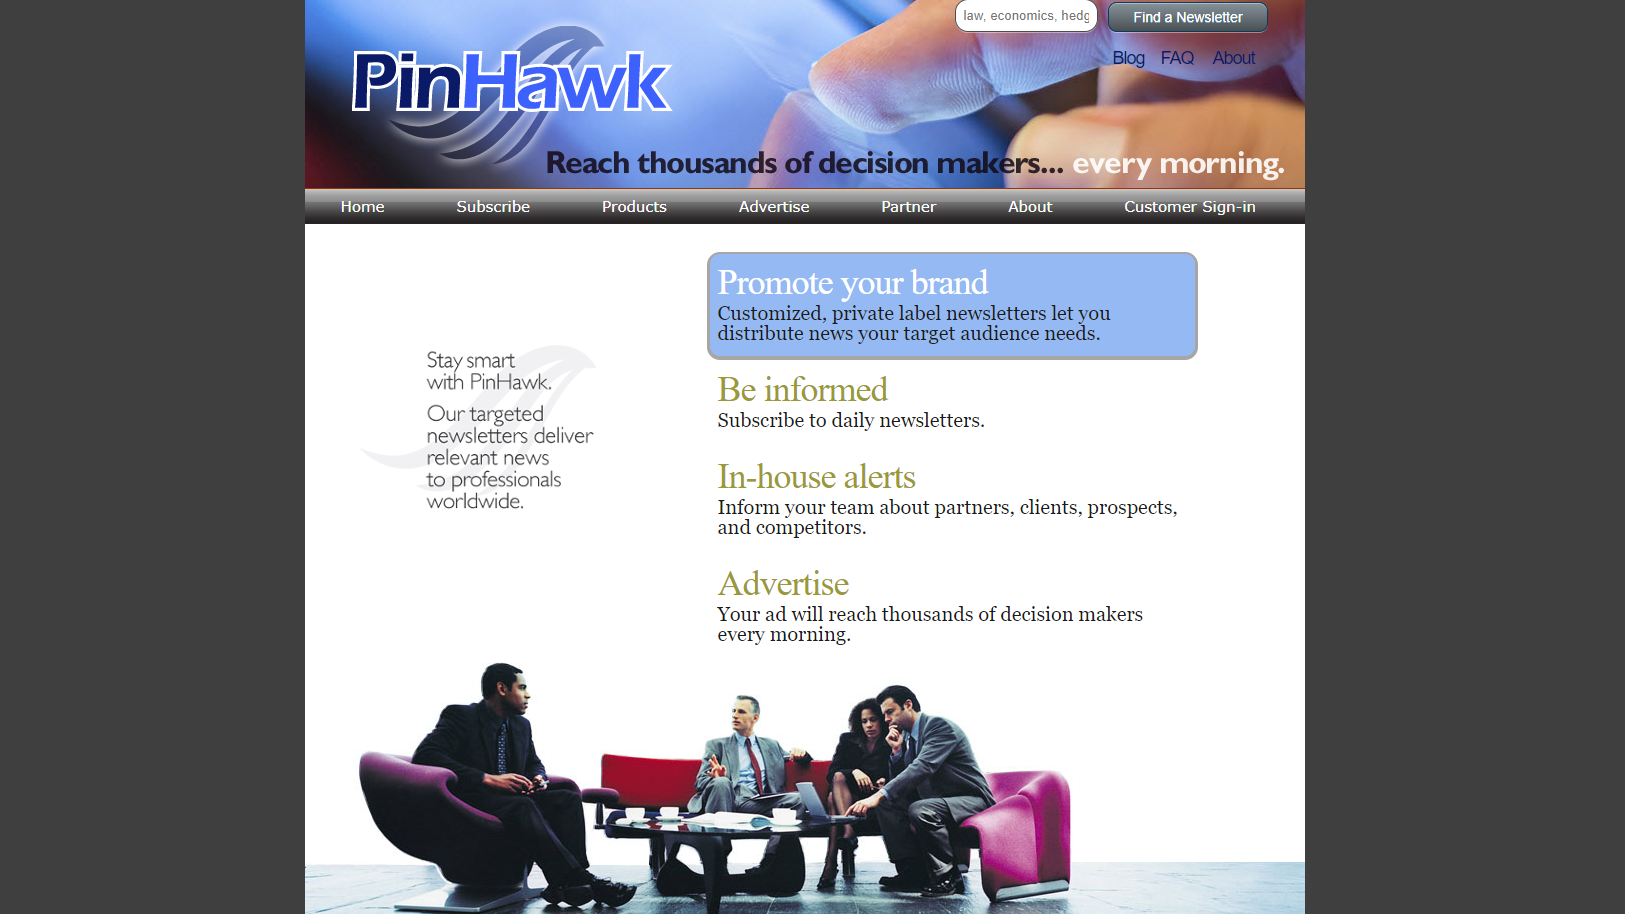 PinHawk Legal and Professional Newsletters Acquired By Law Business Media